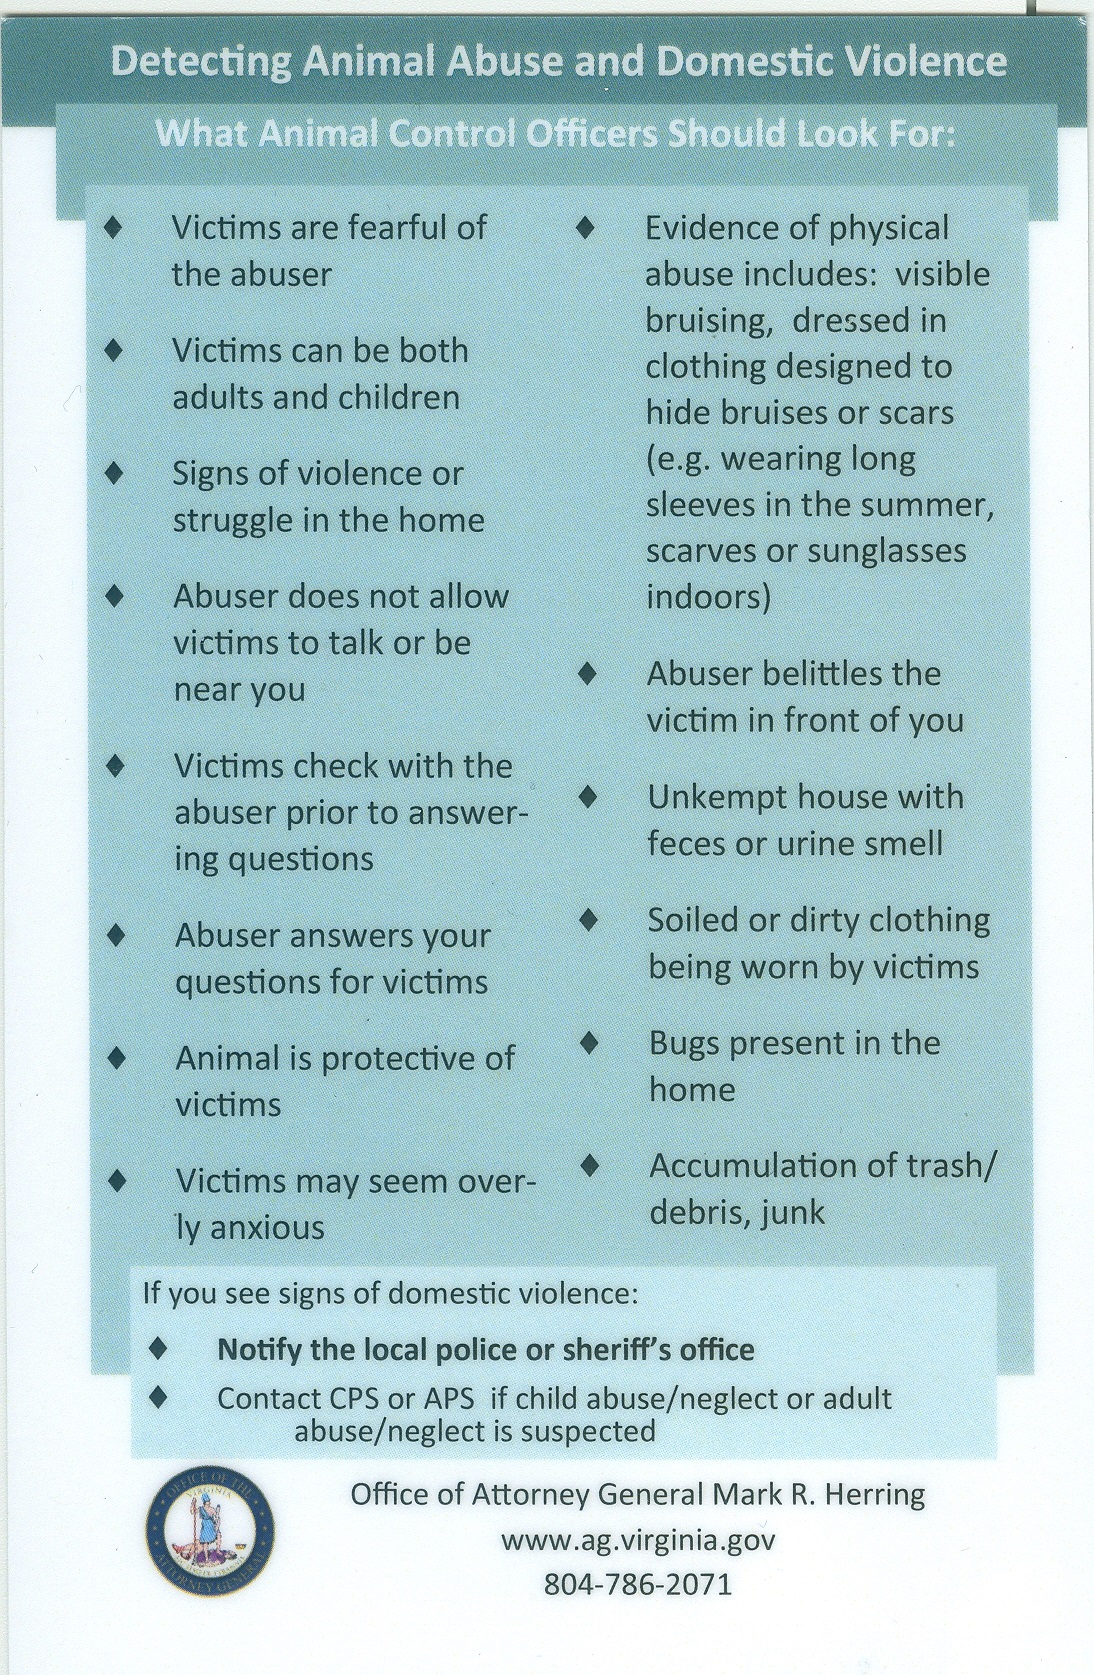 Animal Cruelty and Domestic Violence | NATIONAL SHERIFFS' ASSOCIATION